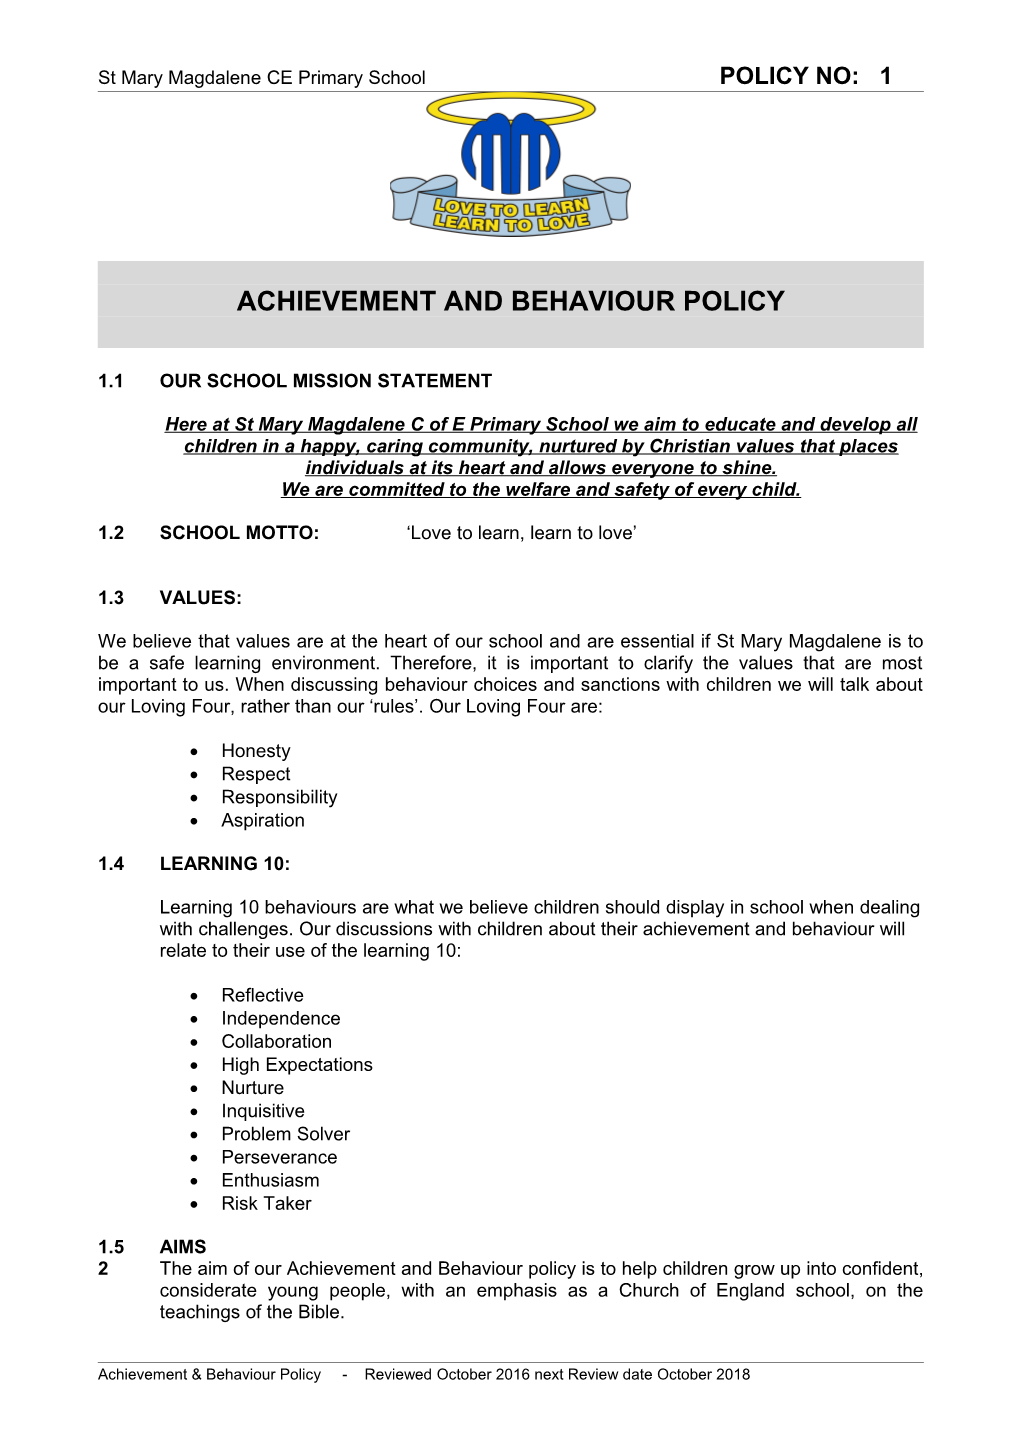 Achievement and Behaviour Policy